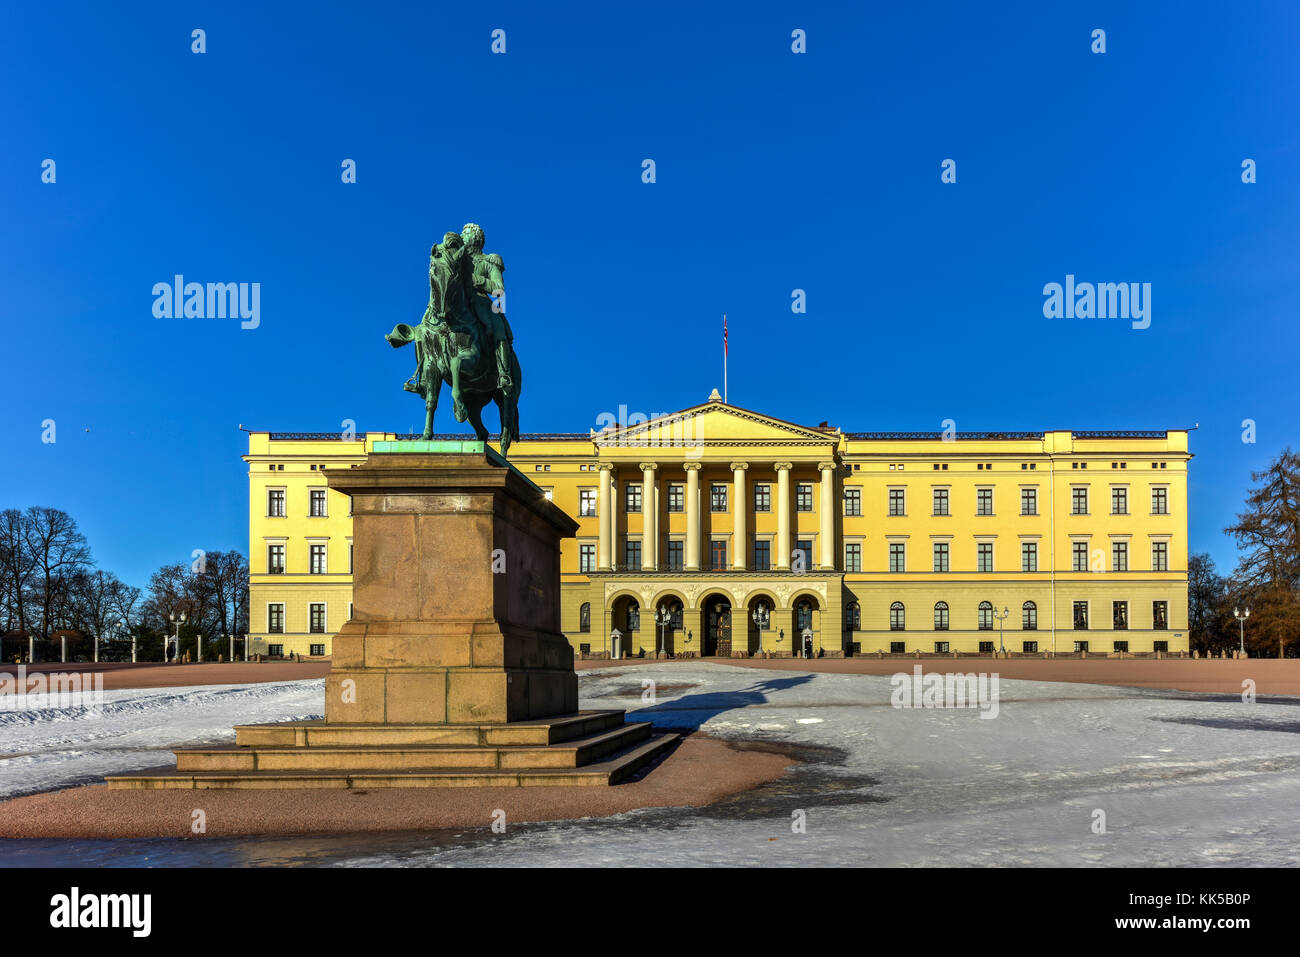 Royal Palace of Oslo. The palace is the official residence of the present Norwegian monarch. Stock Photo